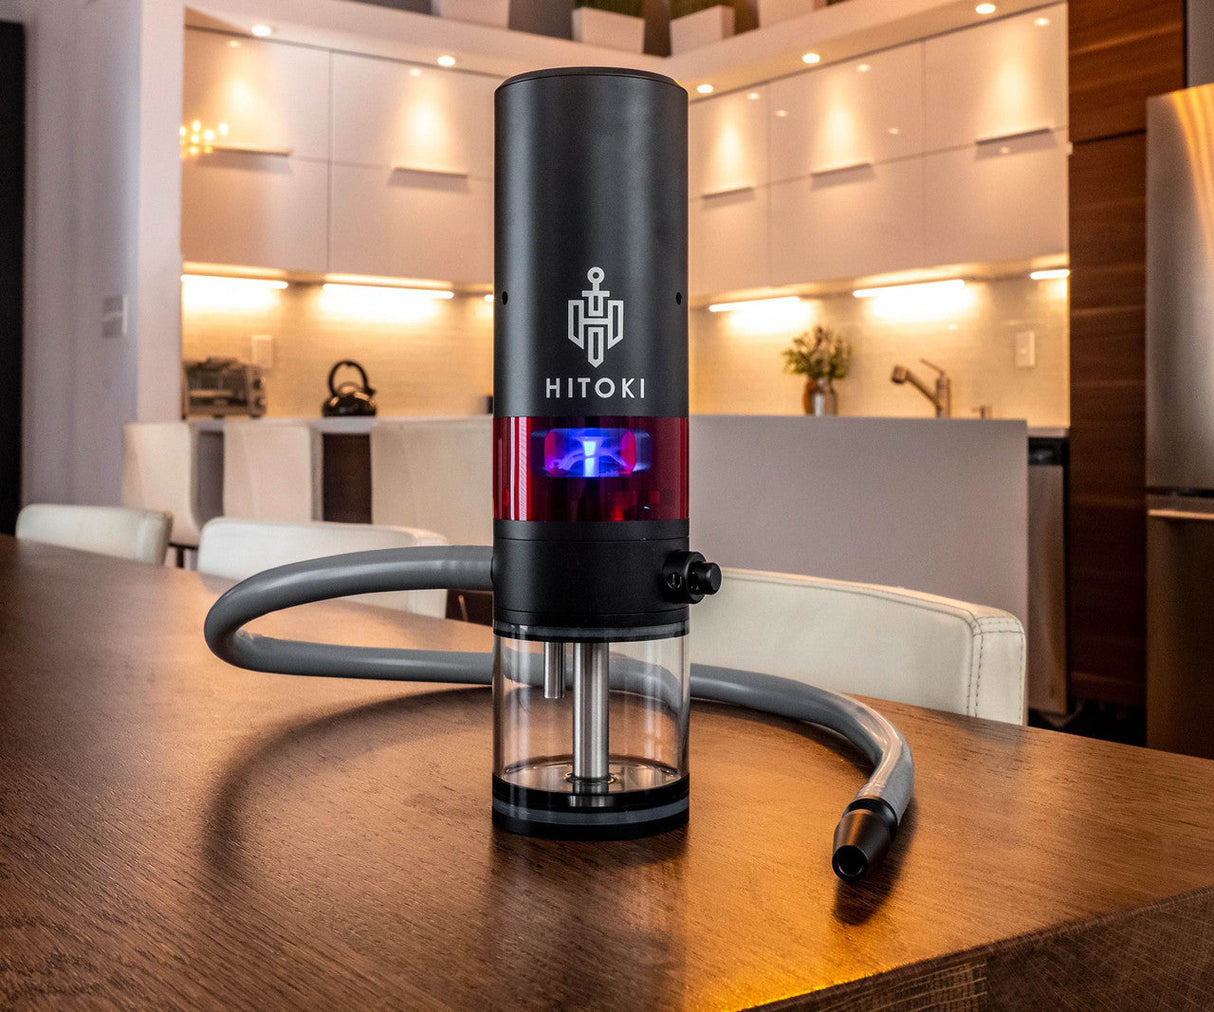 Hitoki Trident Laser Water Pipe 2.0 in Black with blue light, on wooden table, modern kitchen background